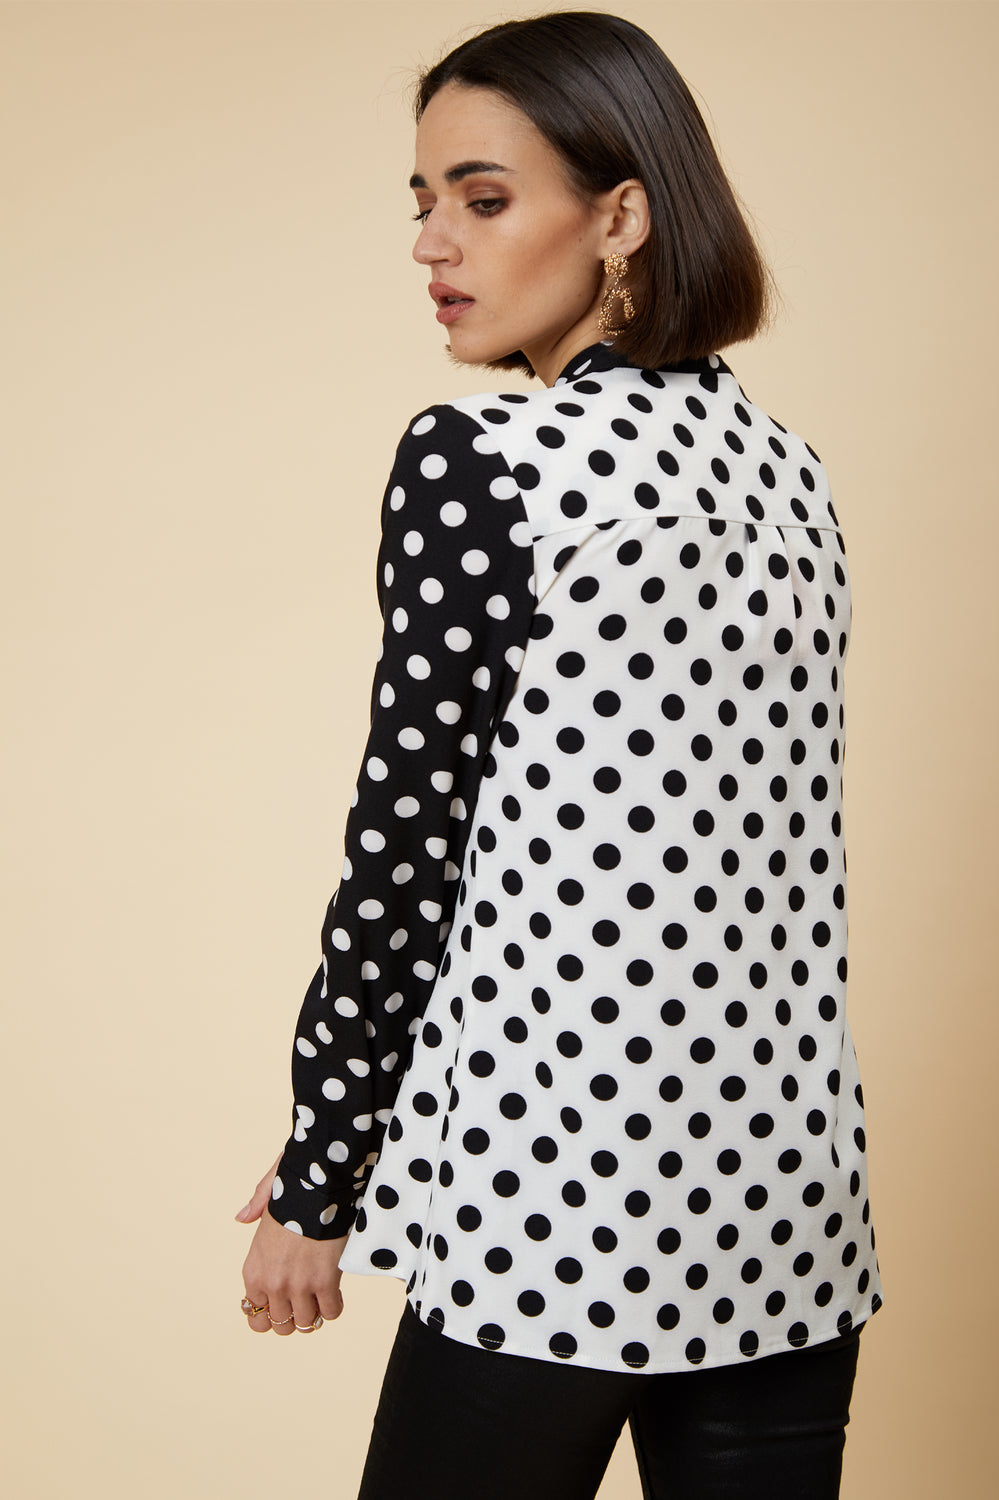 UNIQUE21 Mix & Match Polka Dot Pussybow Shirt Modest Loose-Fitted Long-Sleeved Contrast Blouse With Ribbon Collar in Black and White